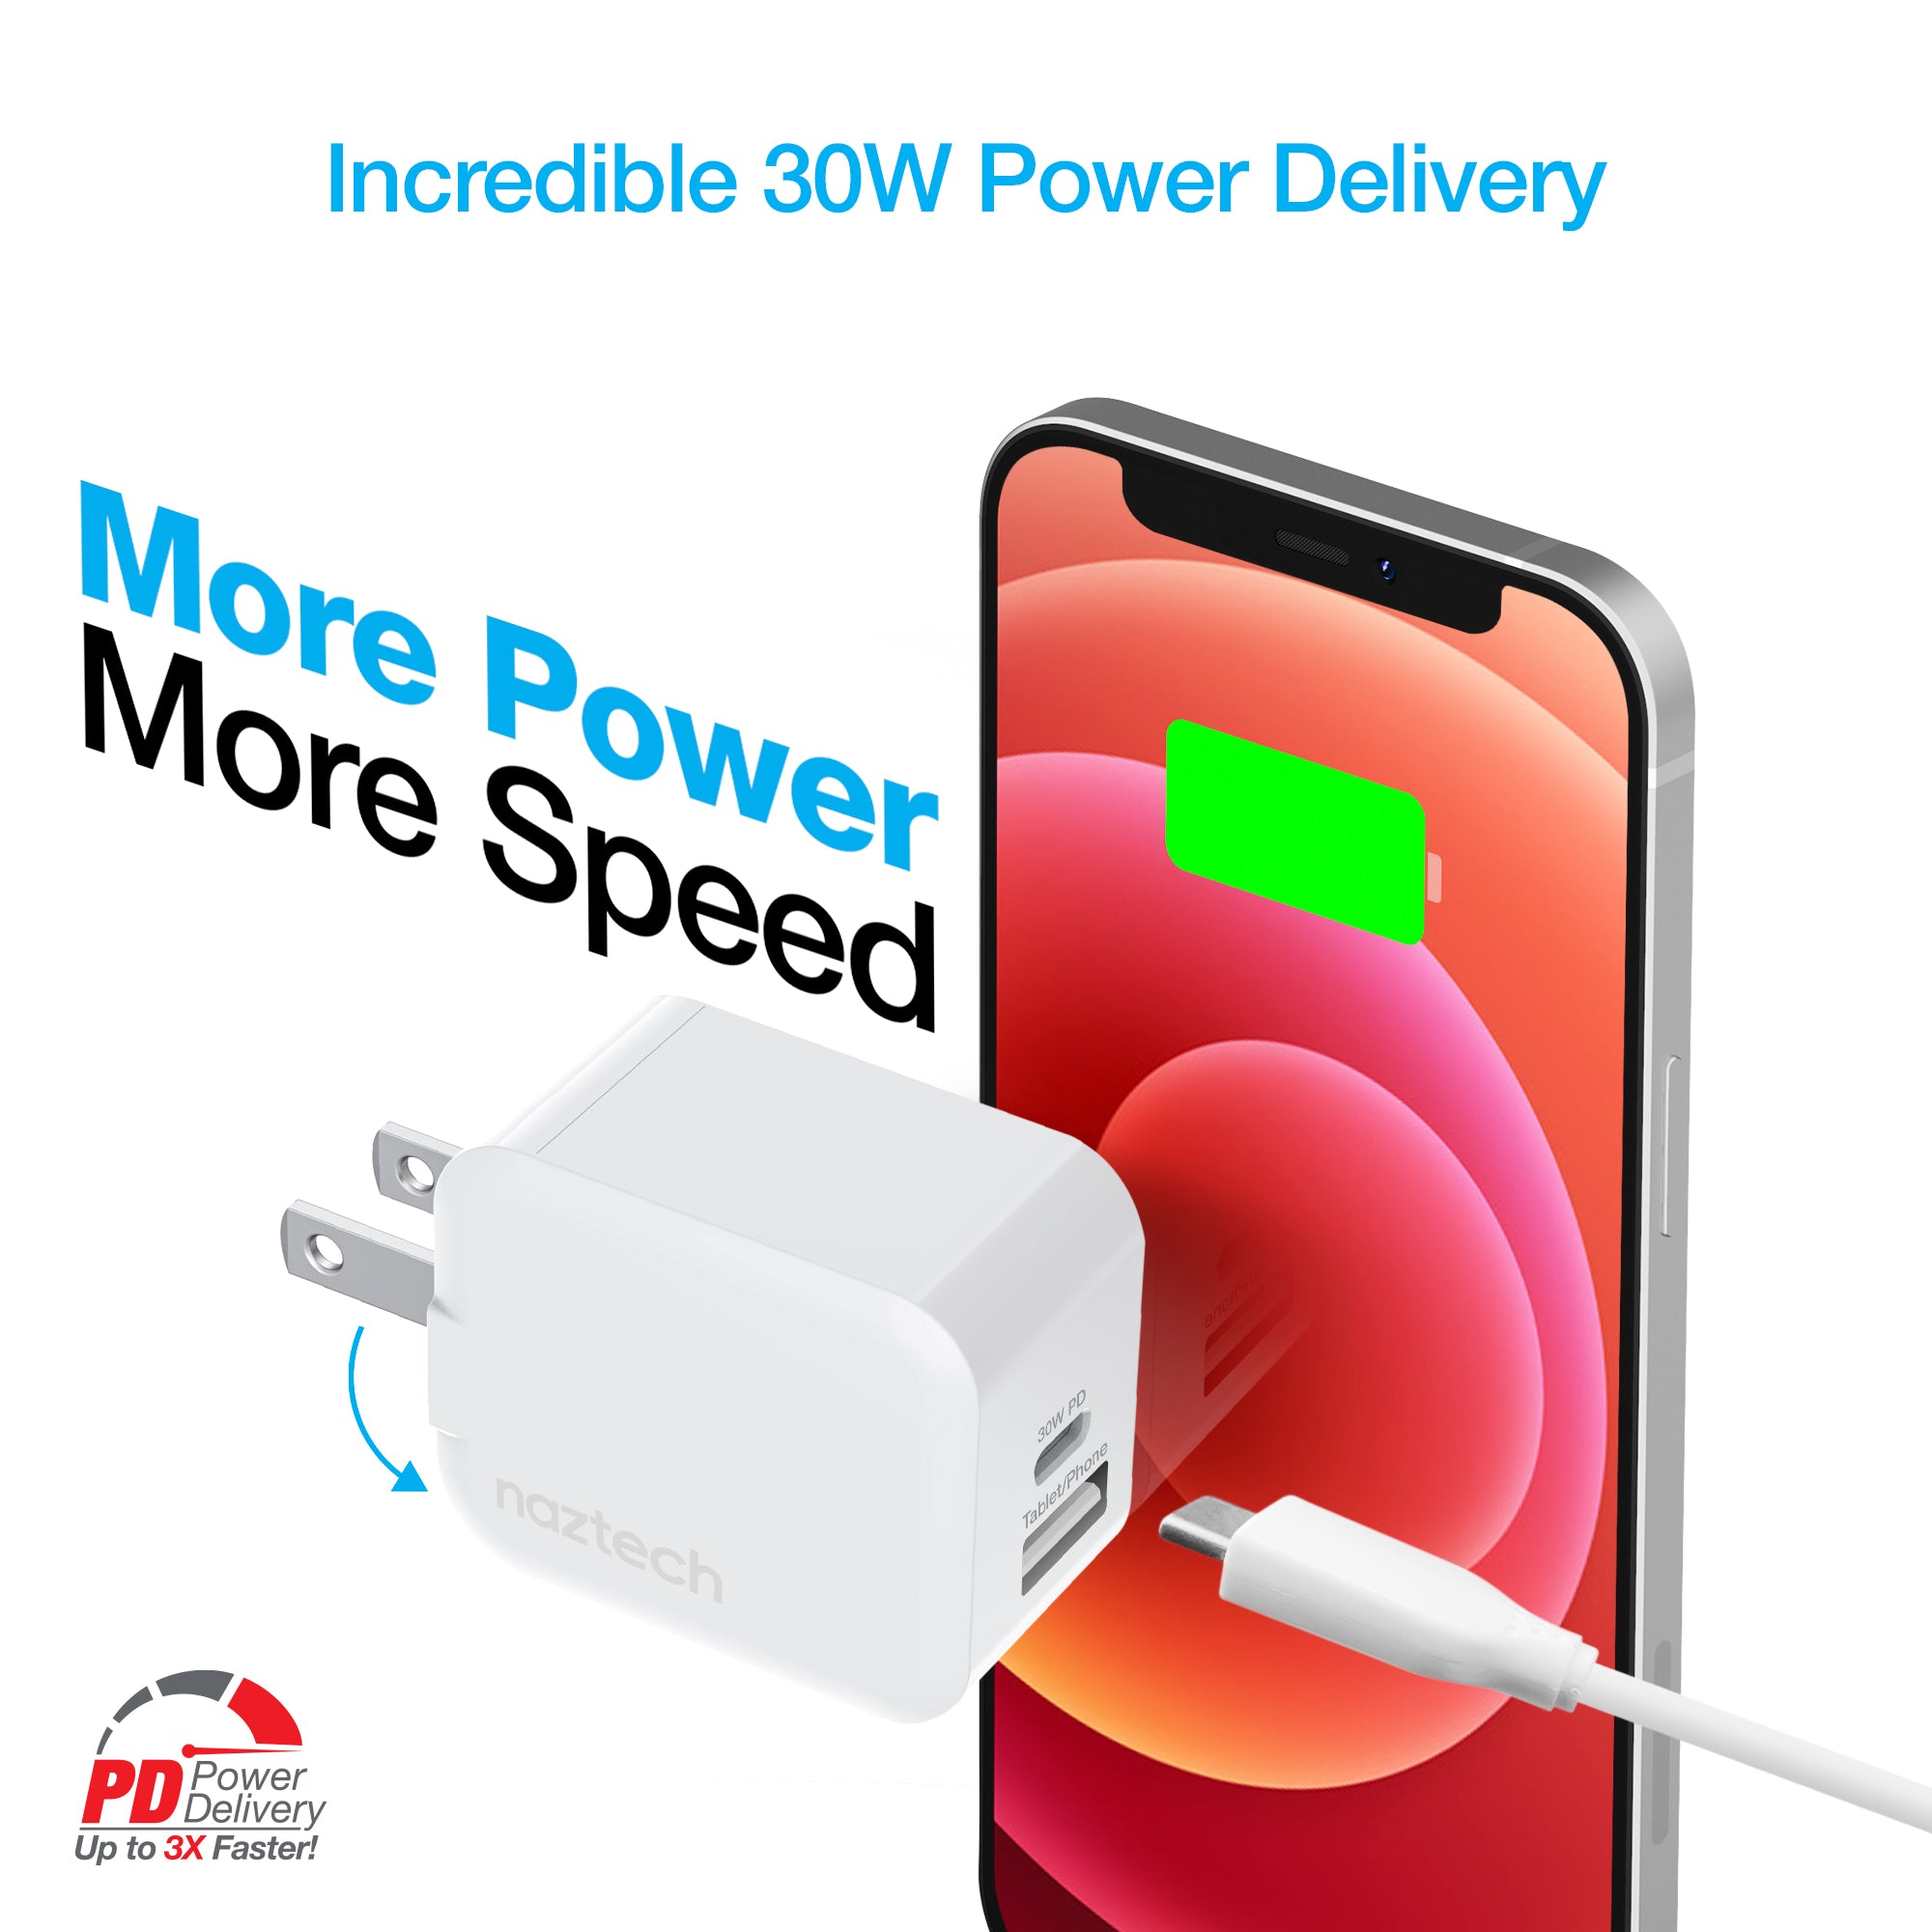 POWEE: CHARGEUR UNIVERSEL USB-C 30W